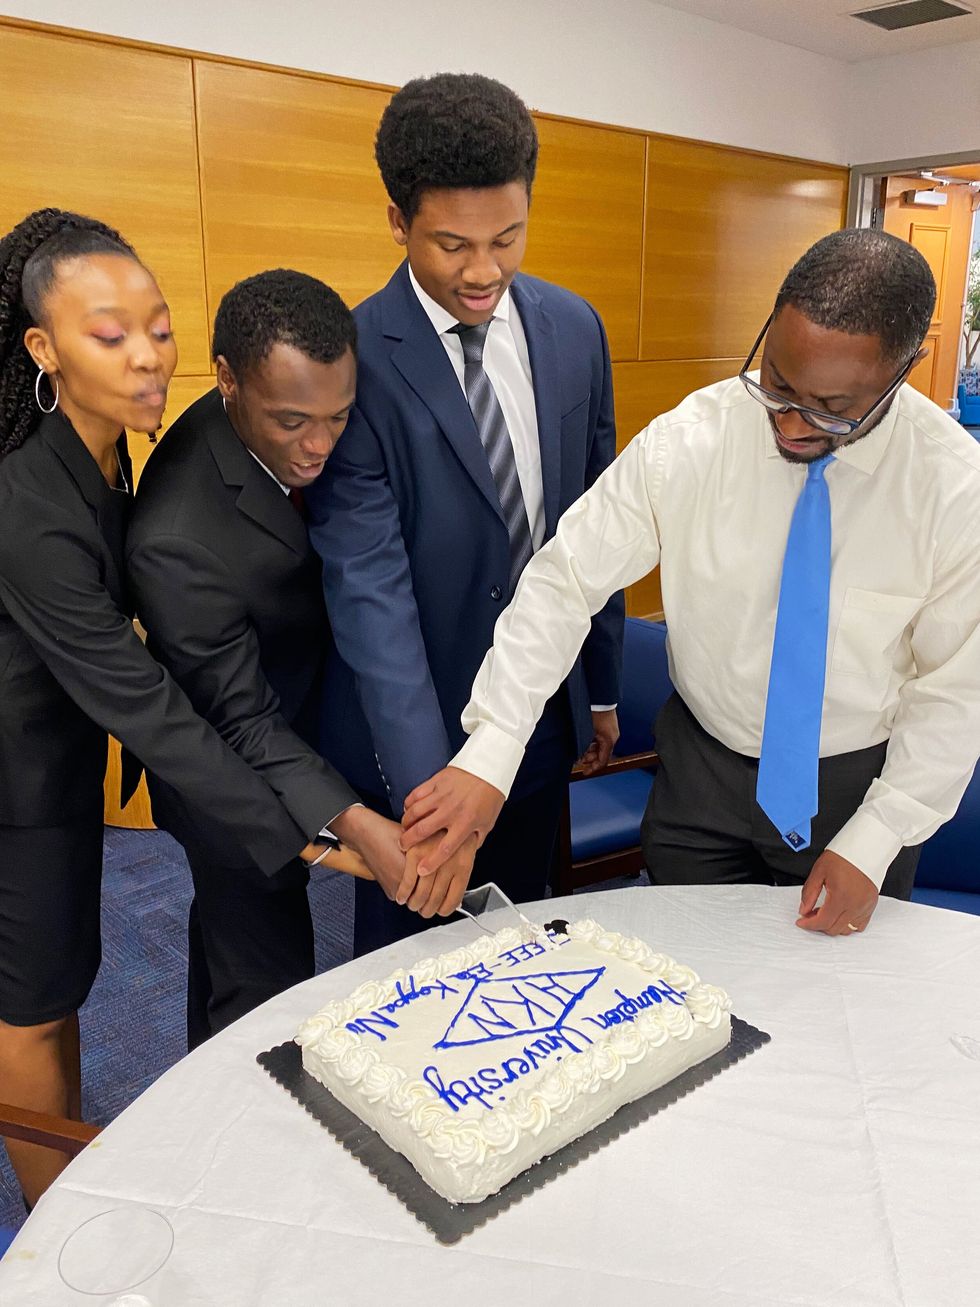 People holding knives and cutting white translucent cake with blue letters on it